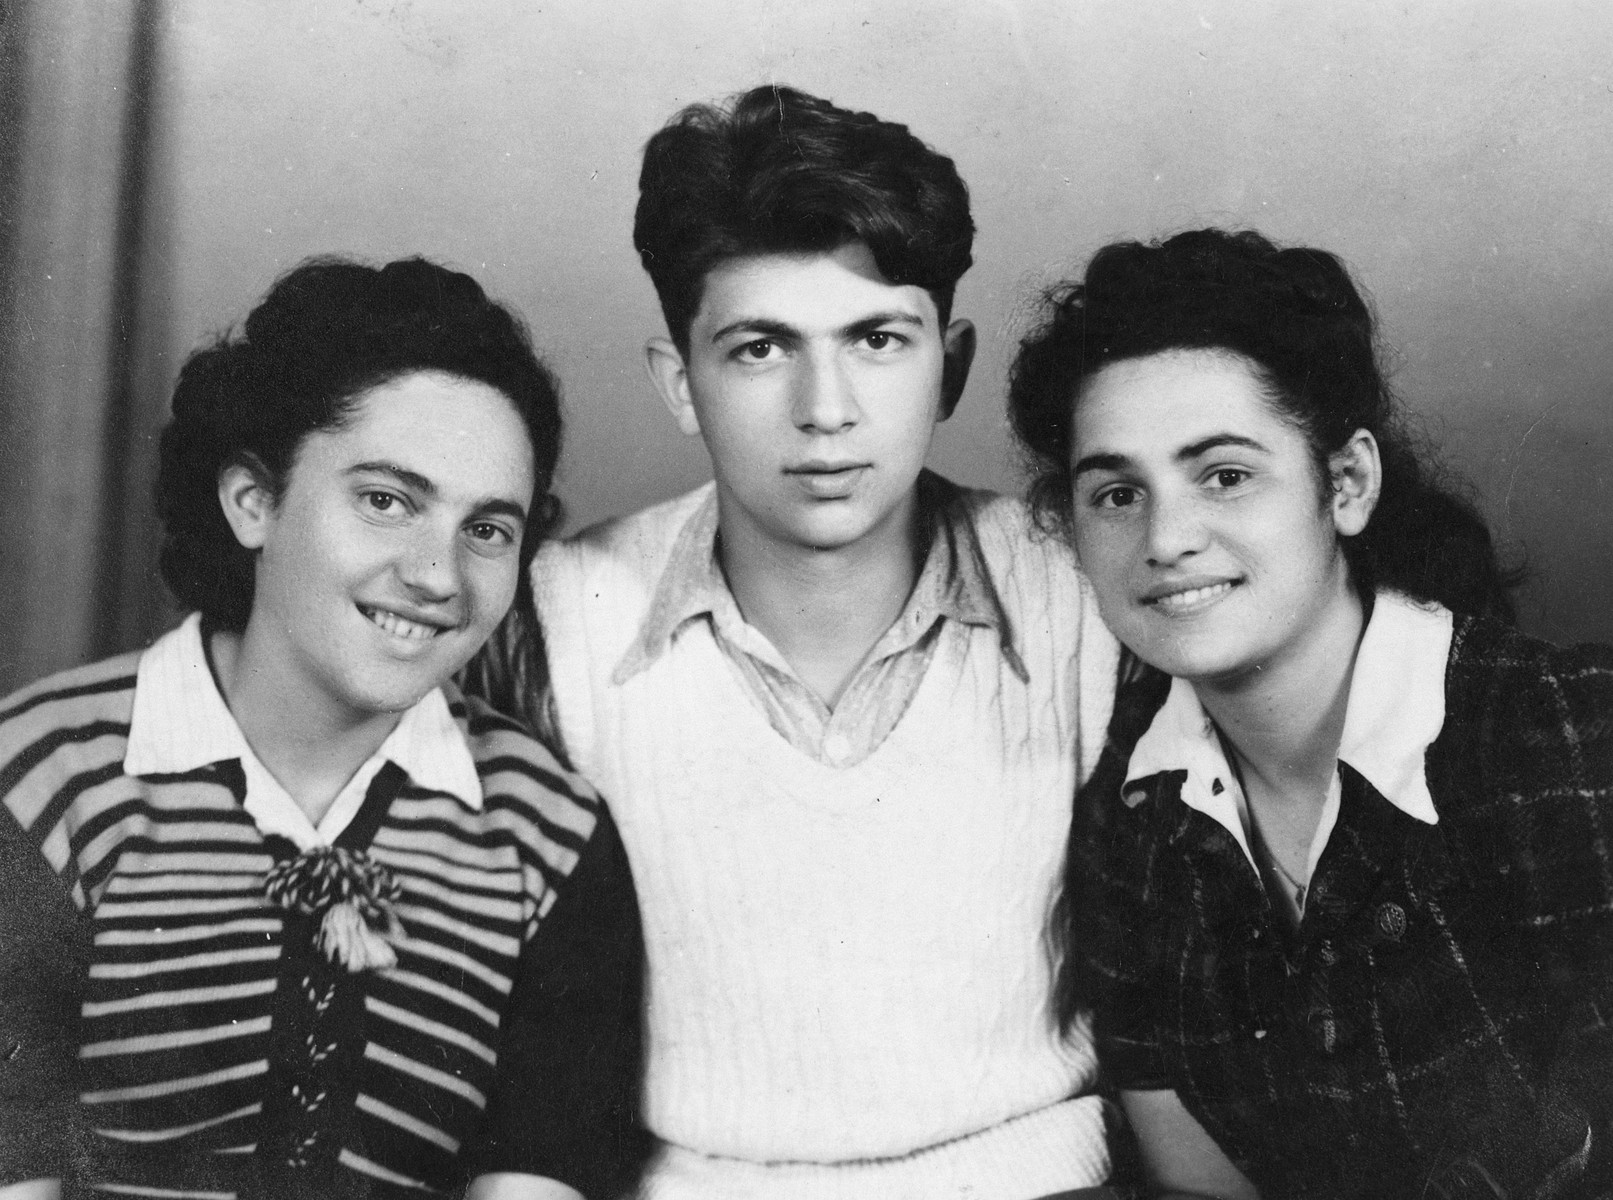 Portrait of three Zionist youth leaders in Poland after the war.

From left to right are Batya Qwint, Zalman Mendelev, and Fira Scapinker.